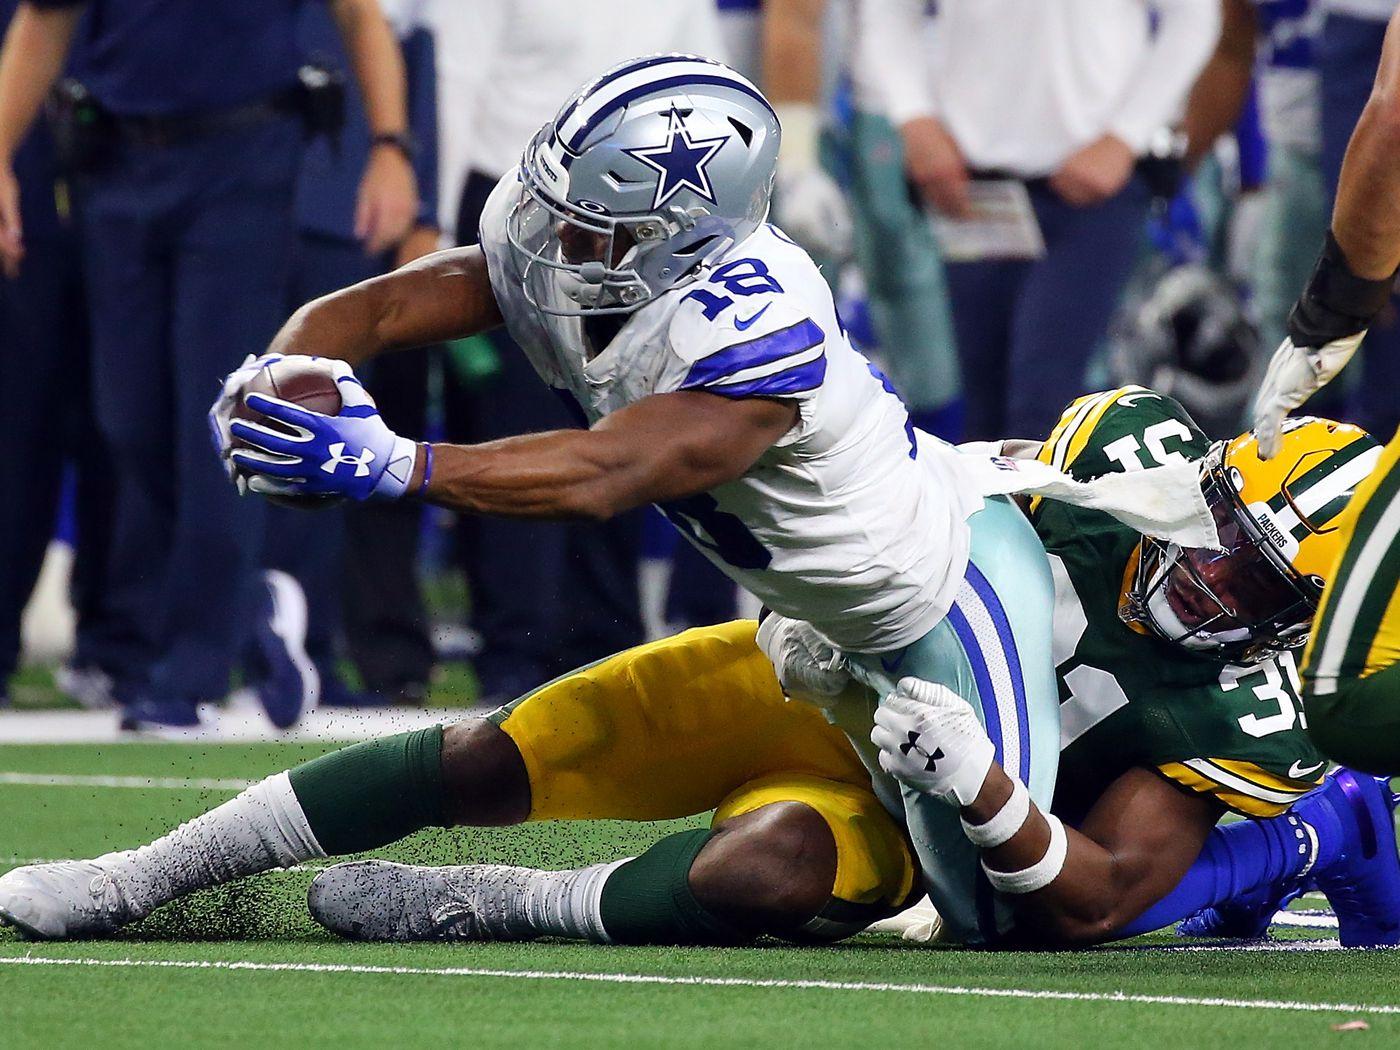 Cowboys Jets injury report: Randall Cobb doesn't practice